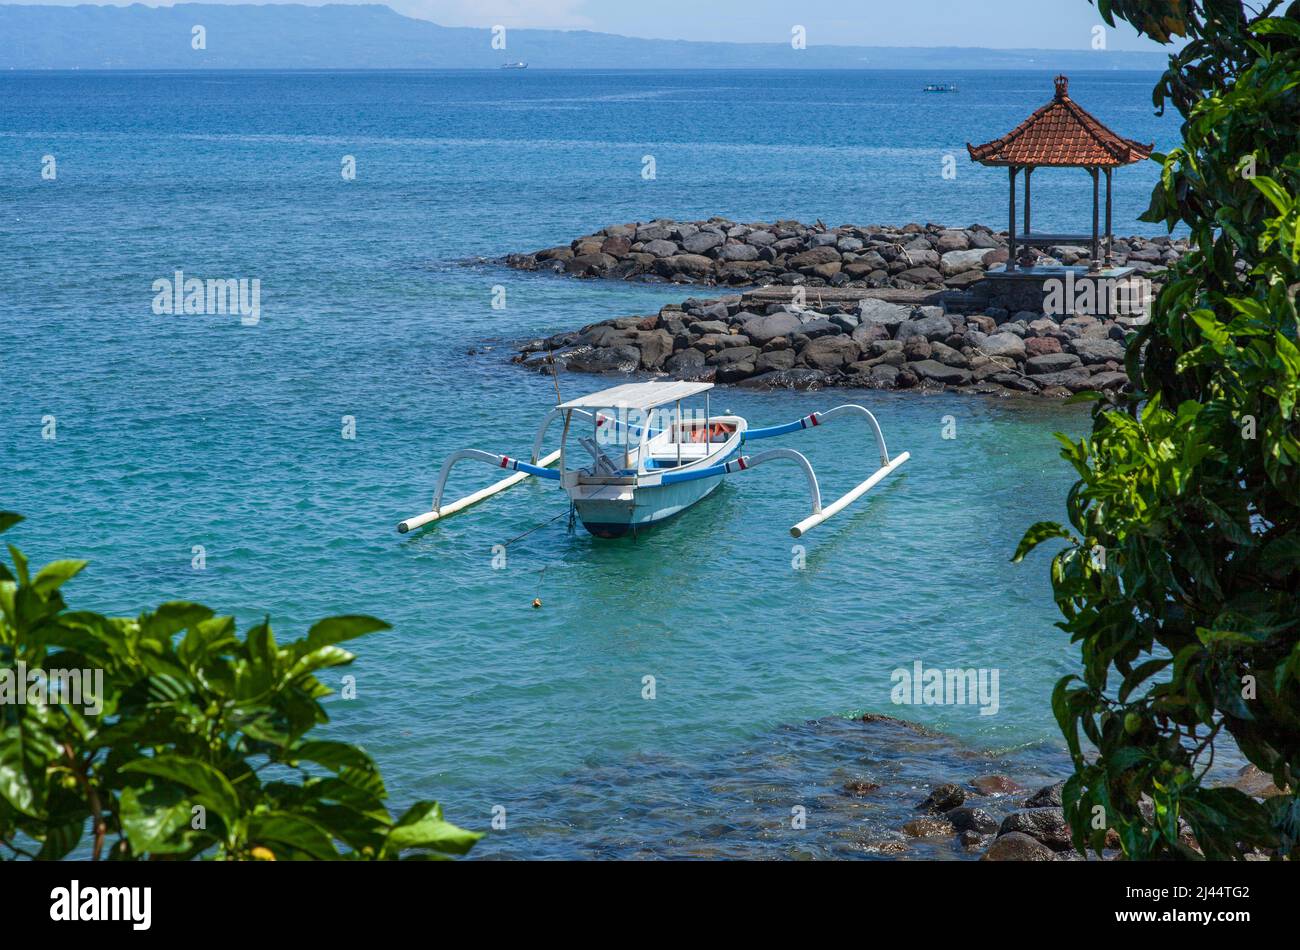 Boats at Candidasa Beach in East Bali, Indonesia. Stock Photo